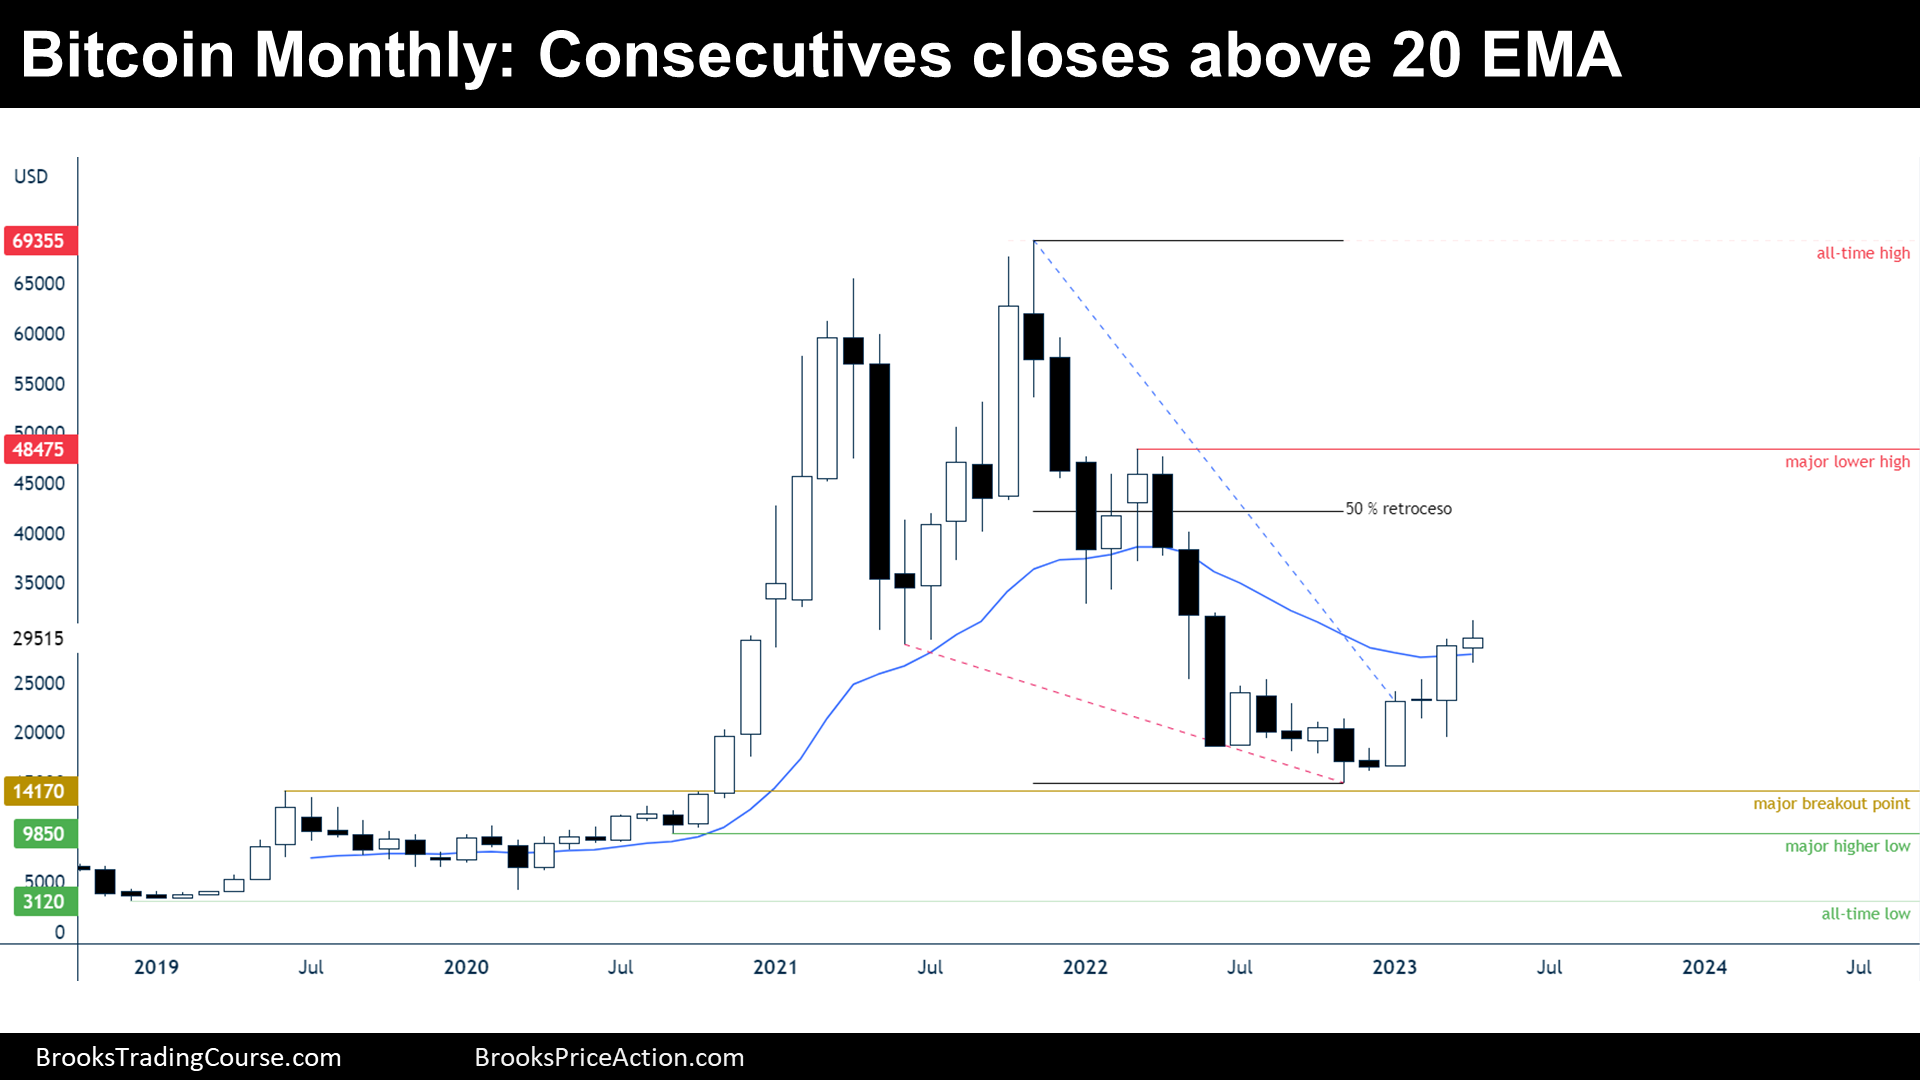 Bitcoin consecutive closes above 20 EMA on monthly chart